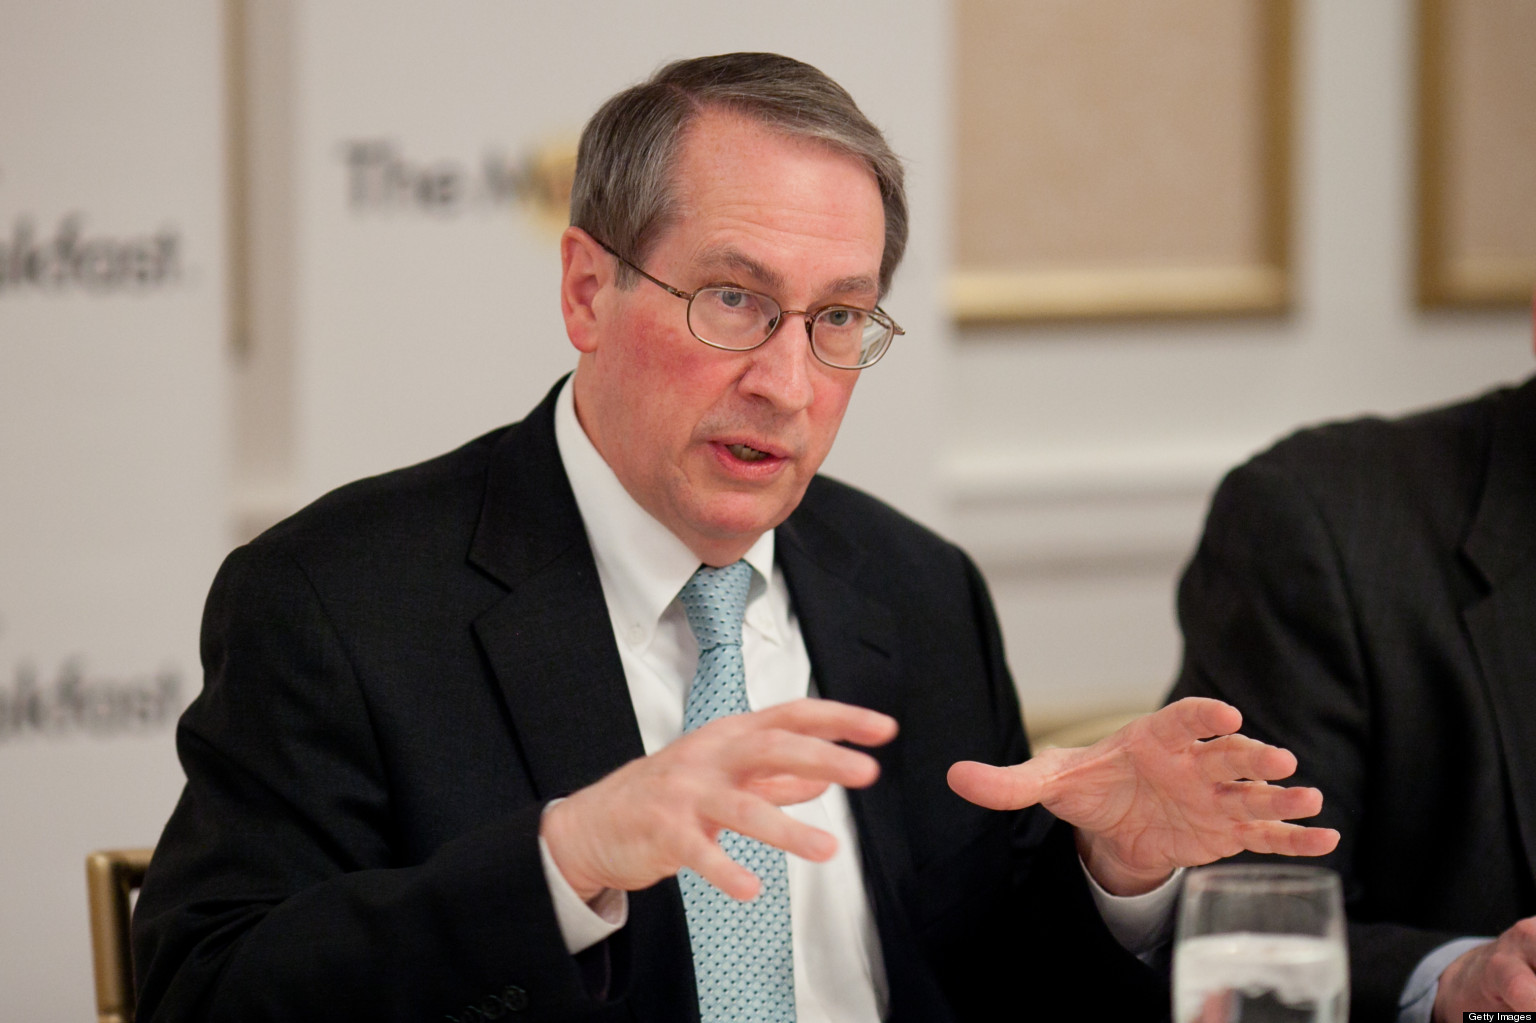 WASHINGTON, DISTRICT OF COLUMBIA - FEBRUARY 27: Bob Goodlatte, House Judiciary Committee Chairman speaks at the St. Regis Hotel on February 27, 2013 in Washington, DC. (Photo by Michael Bonfigli/The Christian Science Monitor via Getty Images)